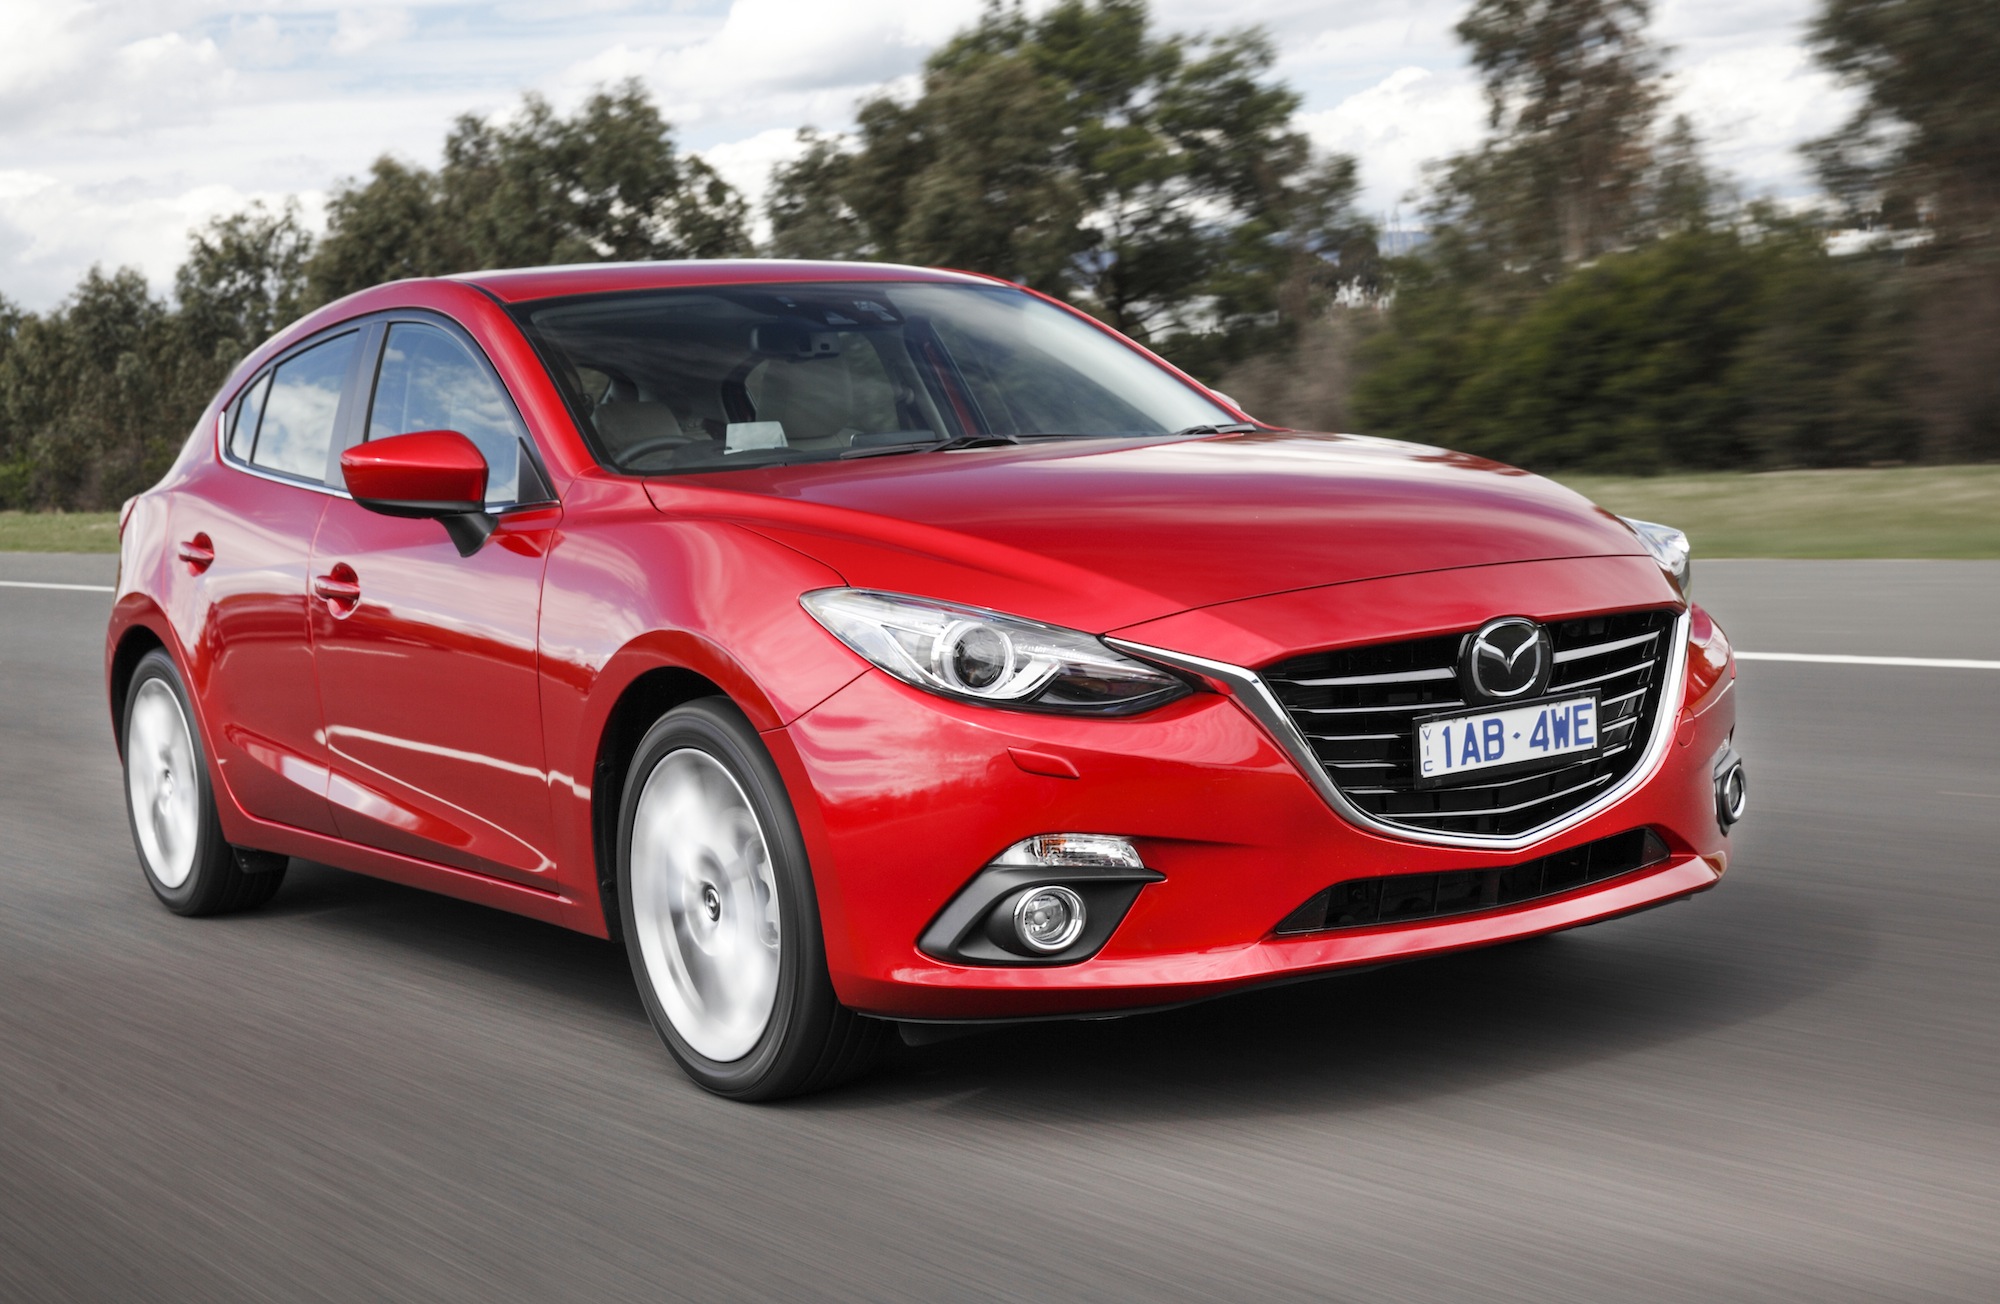 2014 Mazda 3 pricing and specifications Photos (1 of 28)